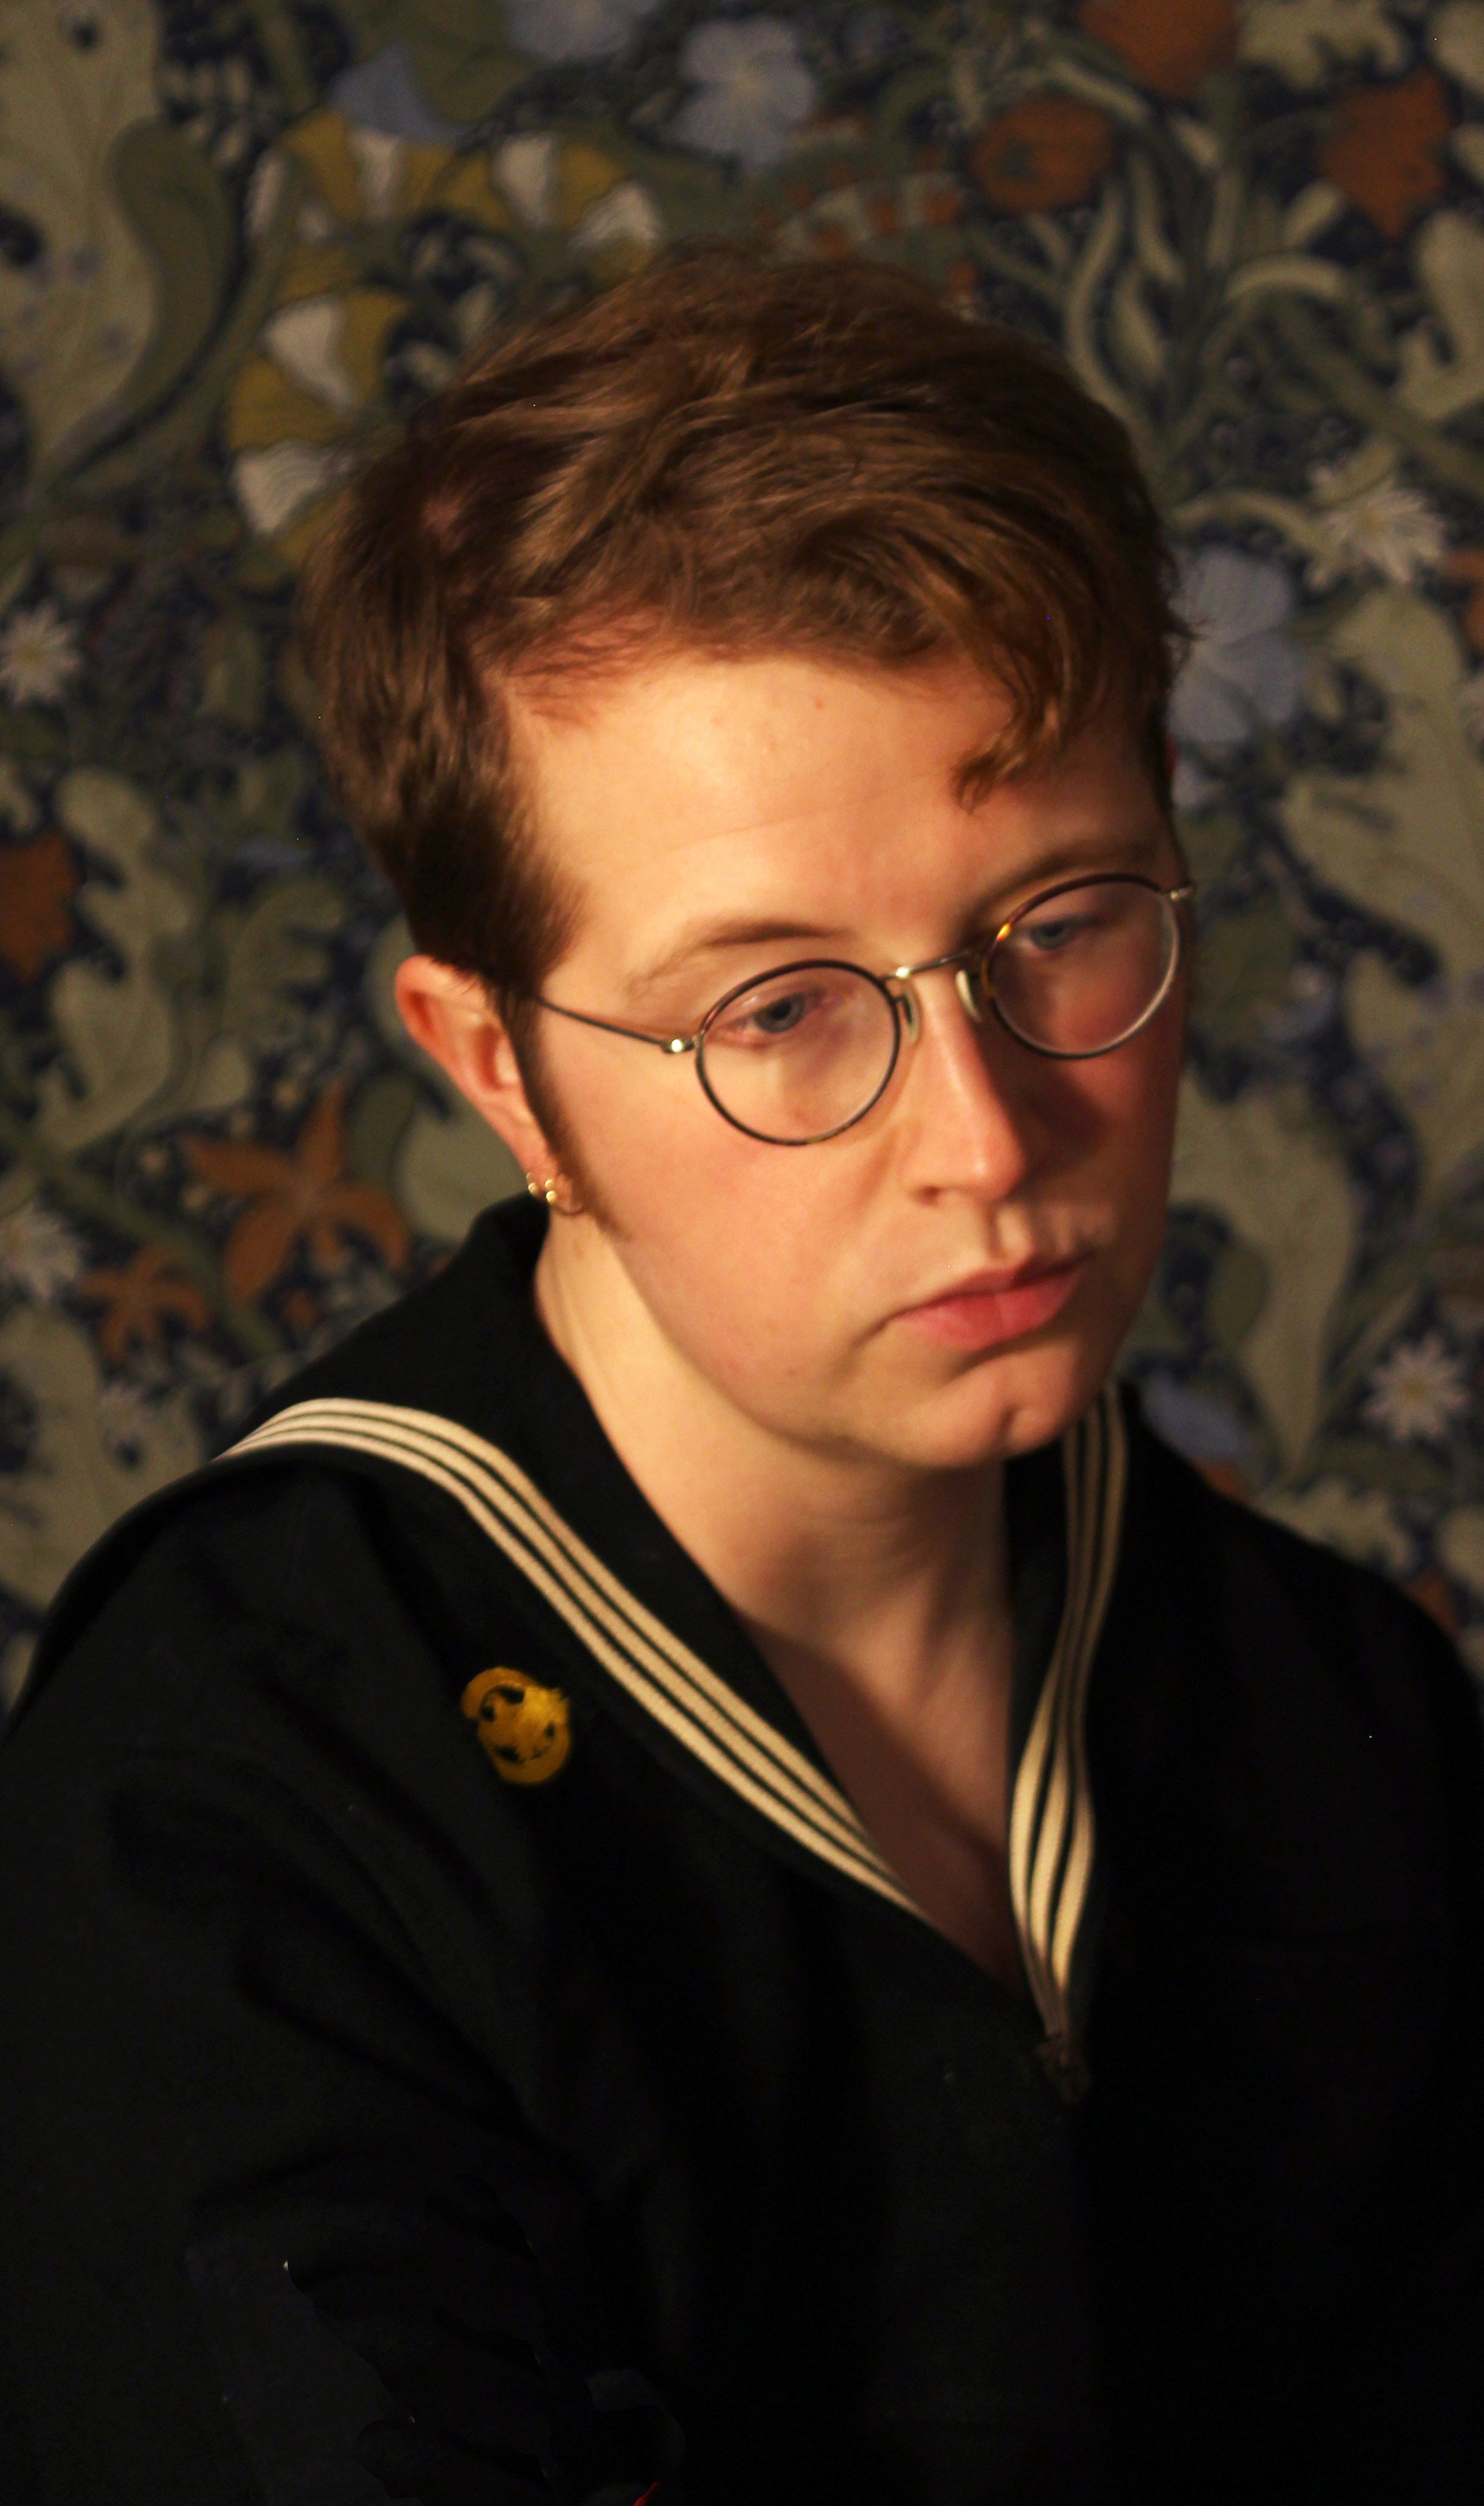 Photo of Artur, a young man with short brown hair and neat round glasses wearing a sailor shirt, in front of a botanical wallpaper.